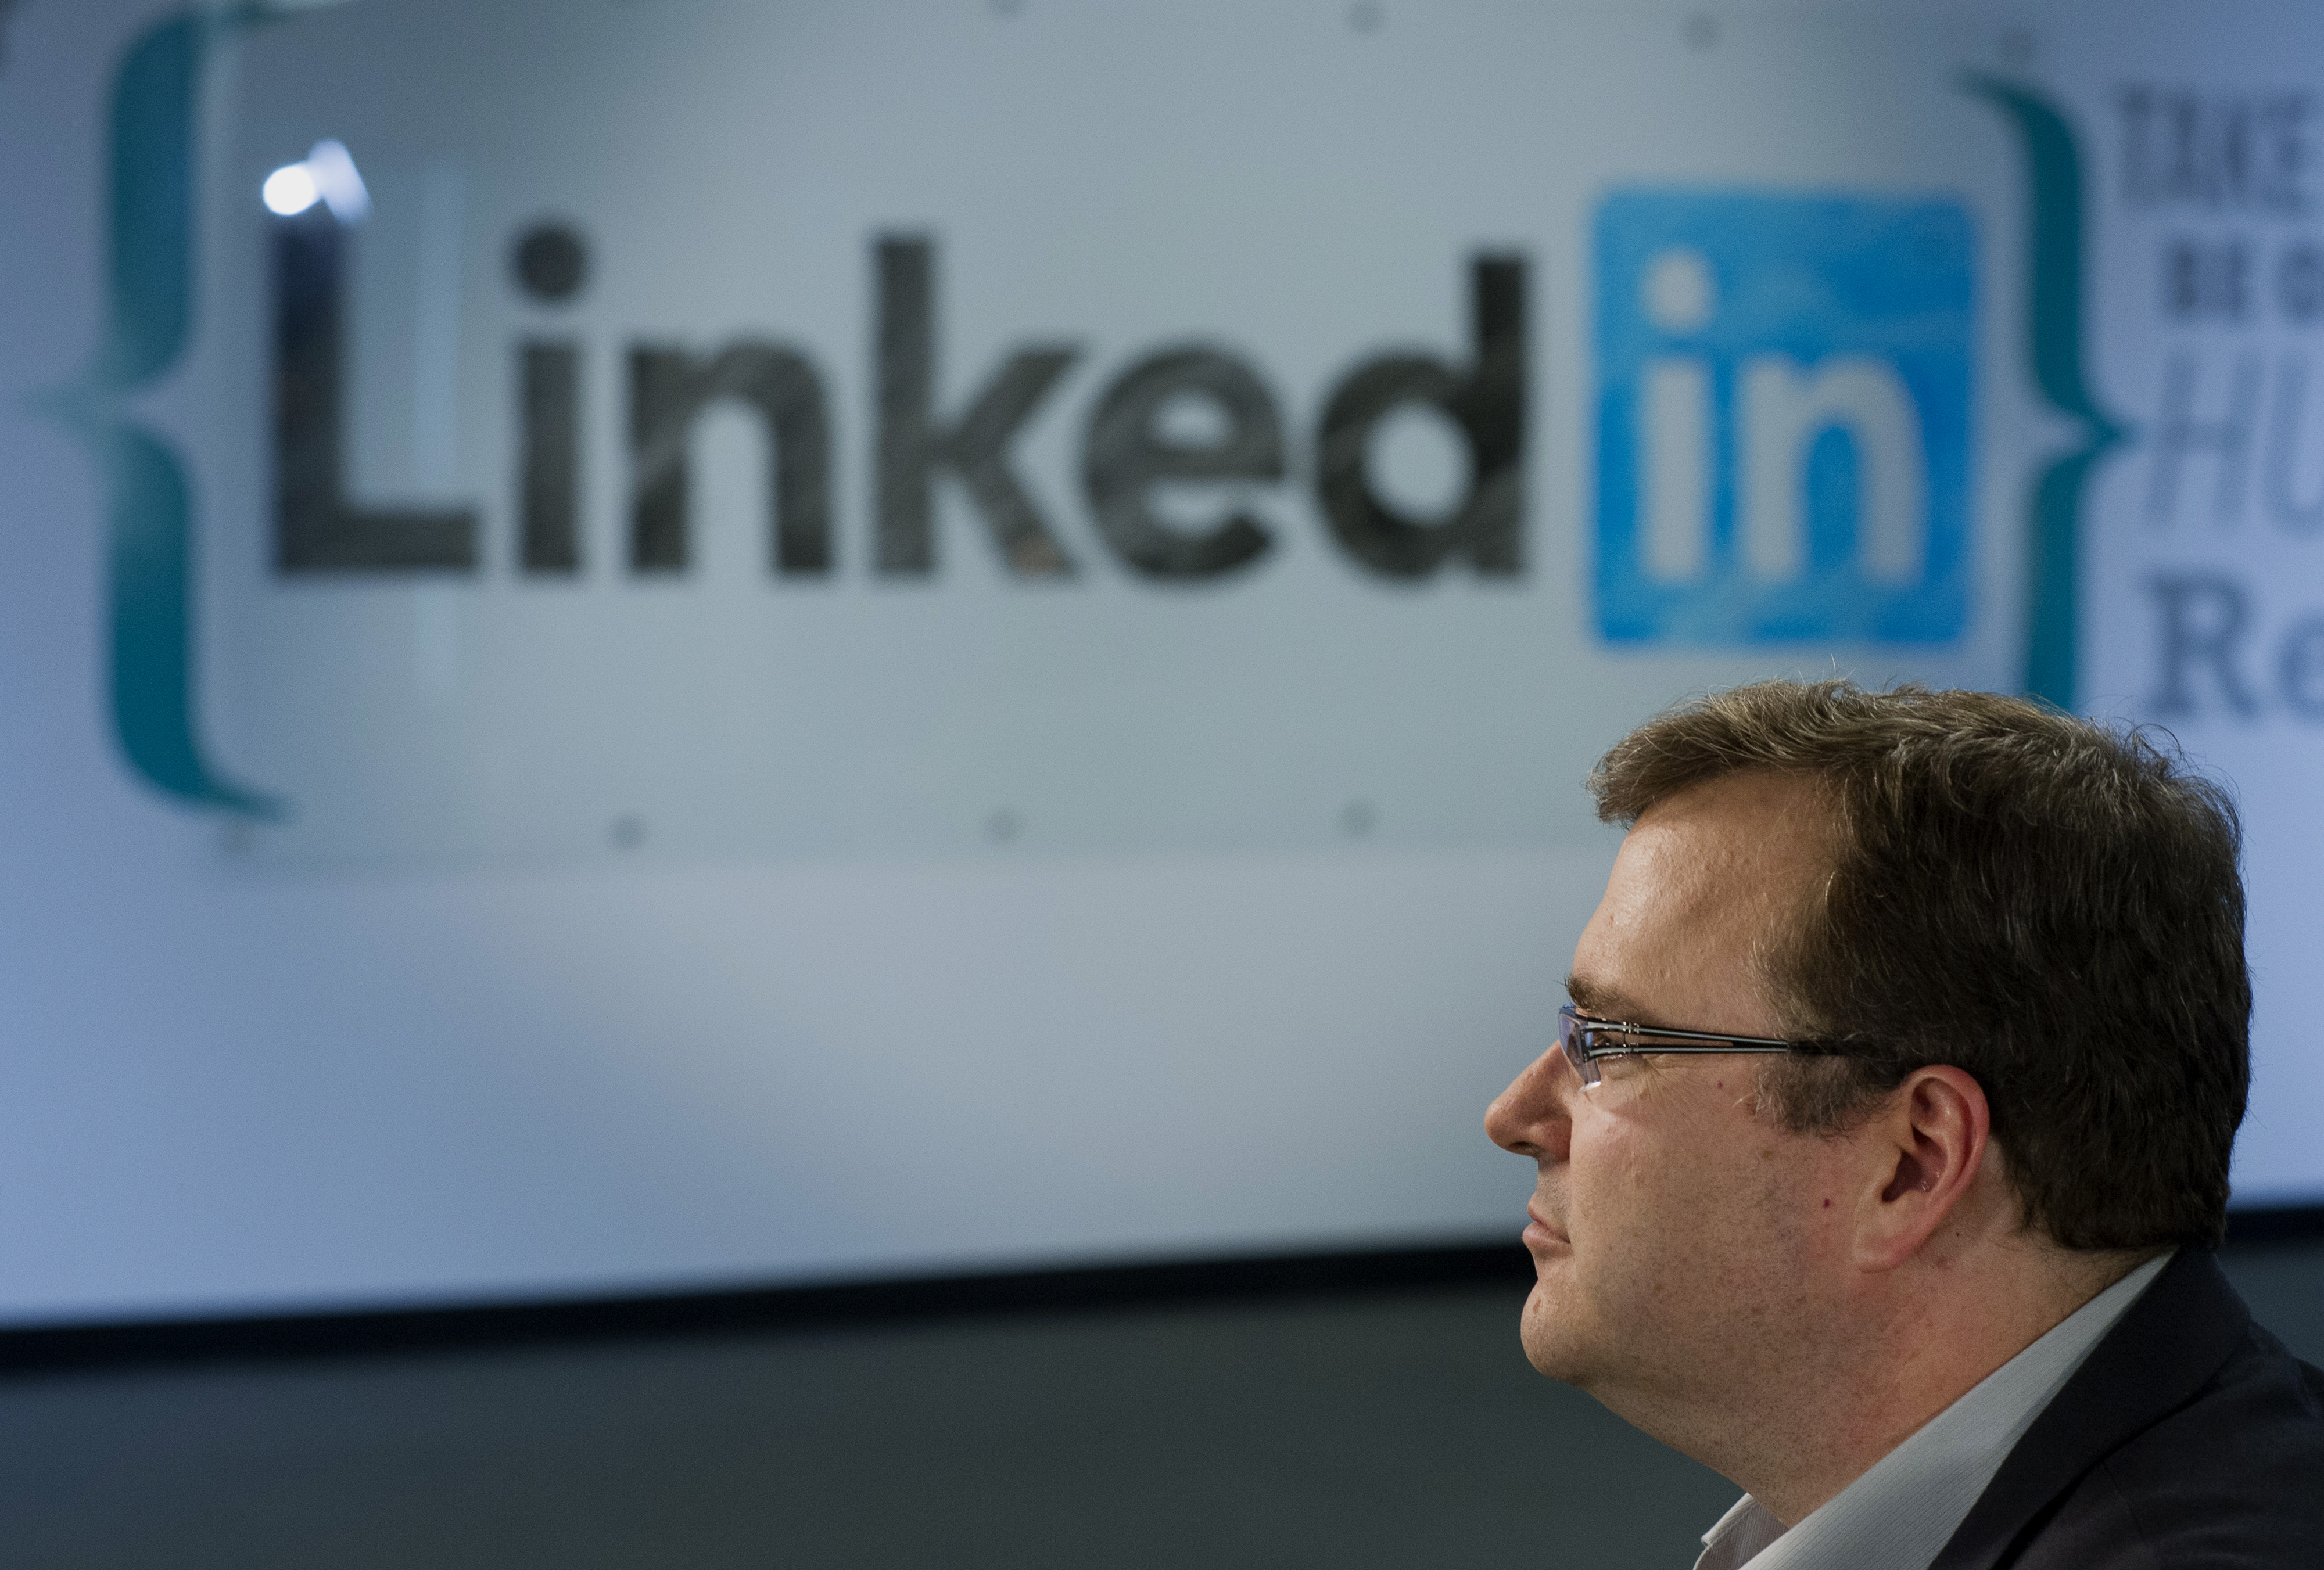 Reid Hoffman, chairman and co-founder of LinkedIn Corp., pauses during a Bloomberg Television interview in Sunnyvale, California, U.S., on Thursday, June 12, 2014. LinkedIn announced last week that users will soon have more design license over their profile pages, with the option of adding stock images or a custom backdrop - similar to what's already available on Facebook and Twitter. Photographer: David Paul Morris/Bloomberg via Getty Images (Bloomberg&mdash;Bloomberg via Getty Images)